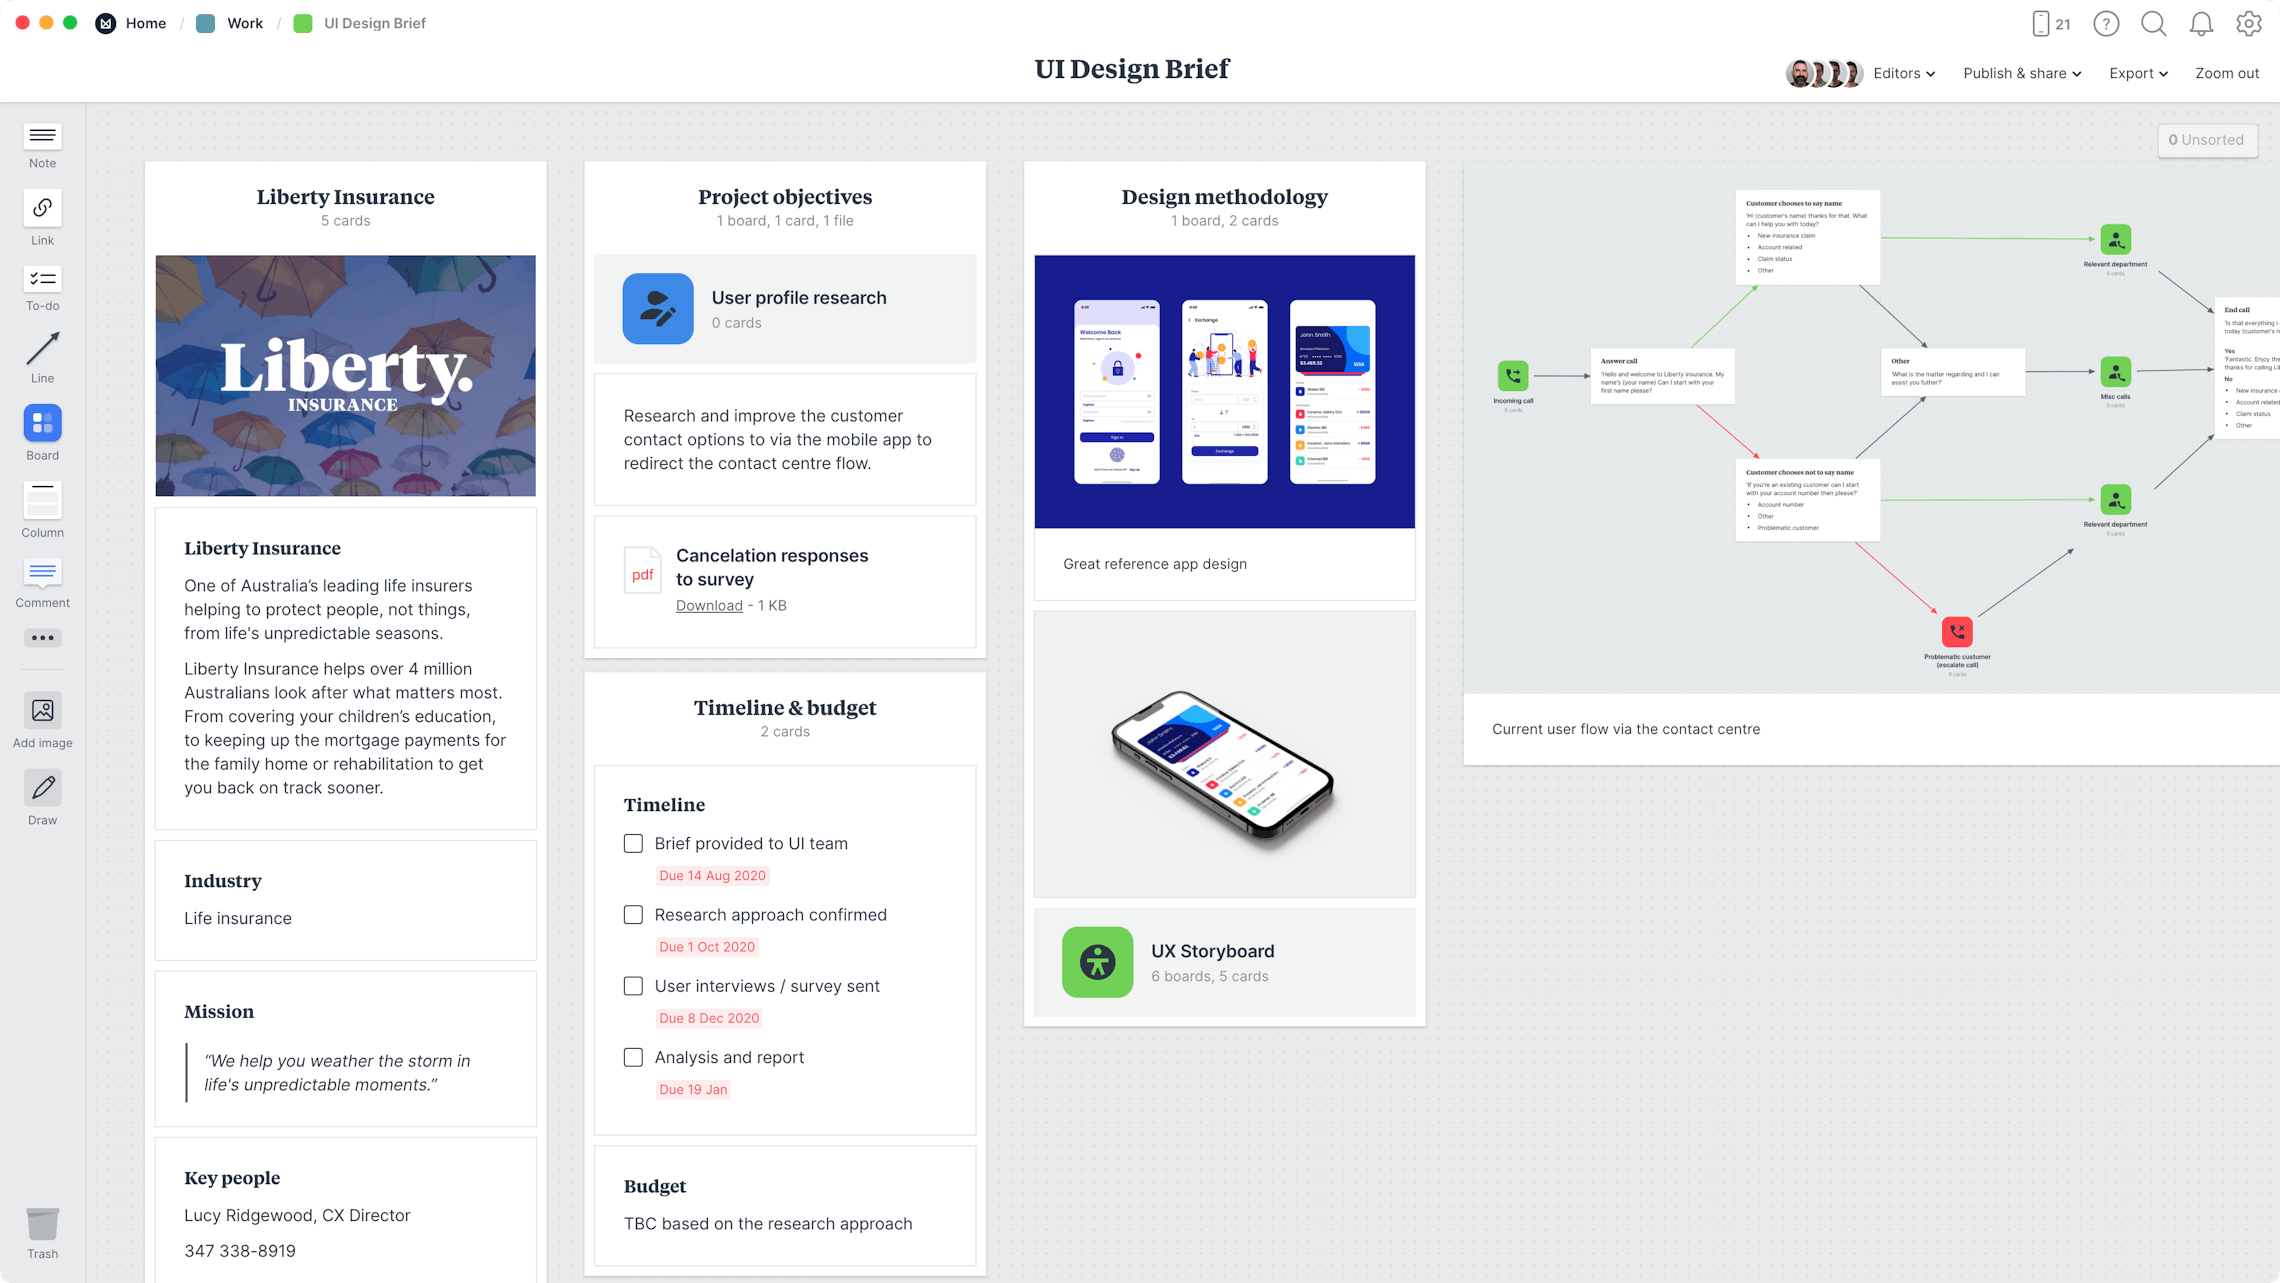 UI Design Brief Template, within the Milanote app